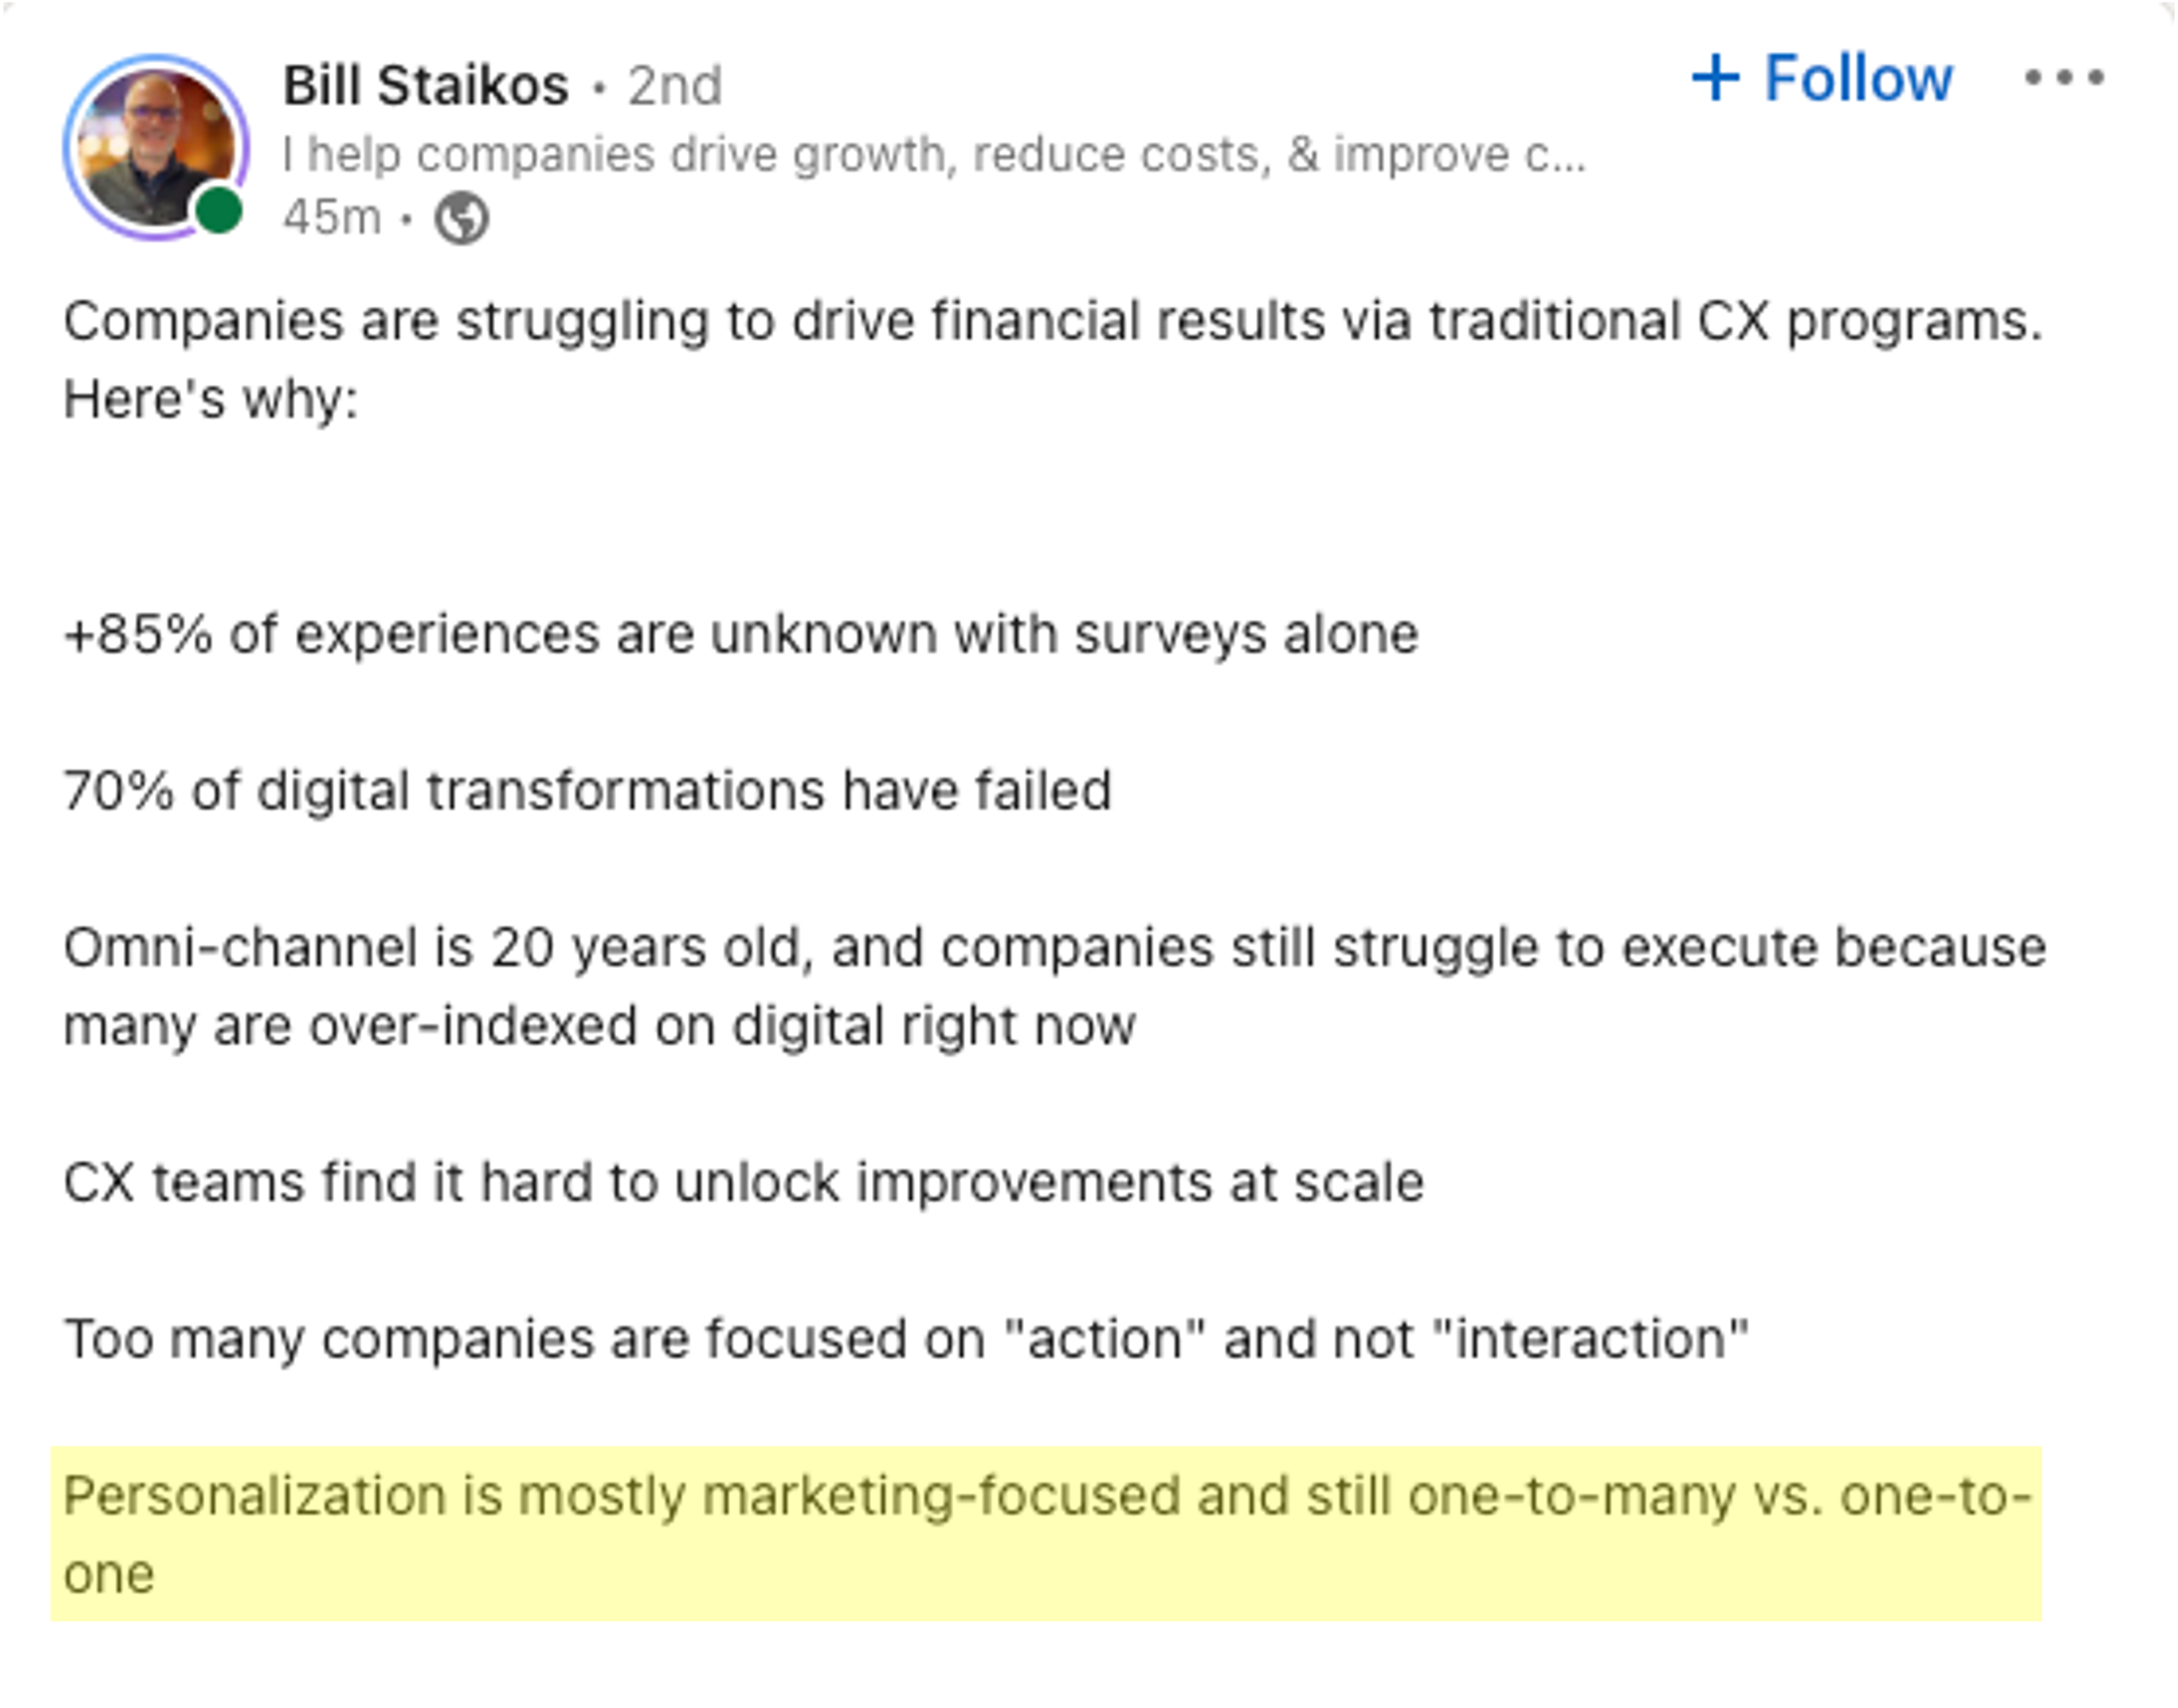 Personalization is mostly marketing-focused and still one-to-many